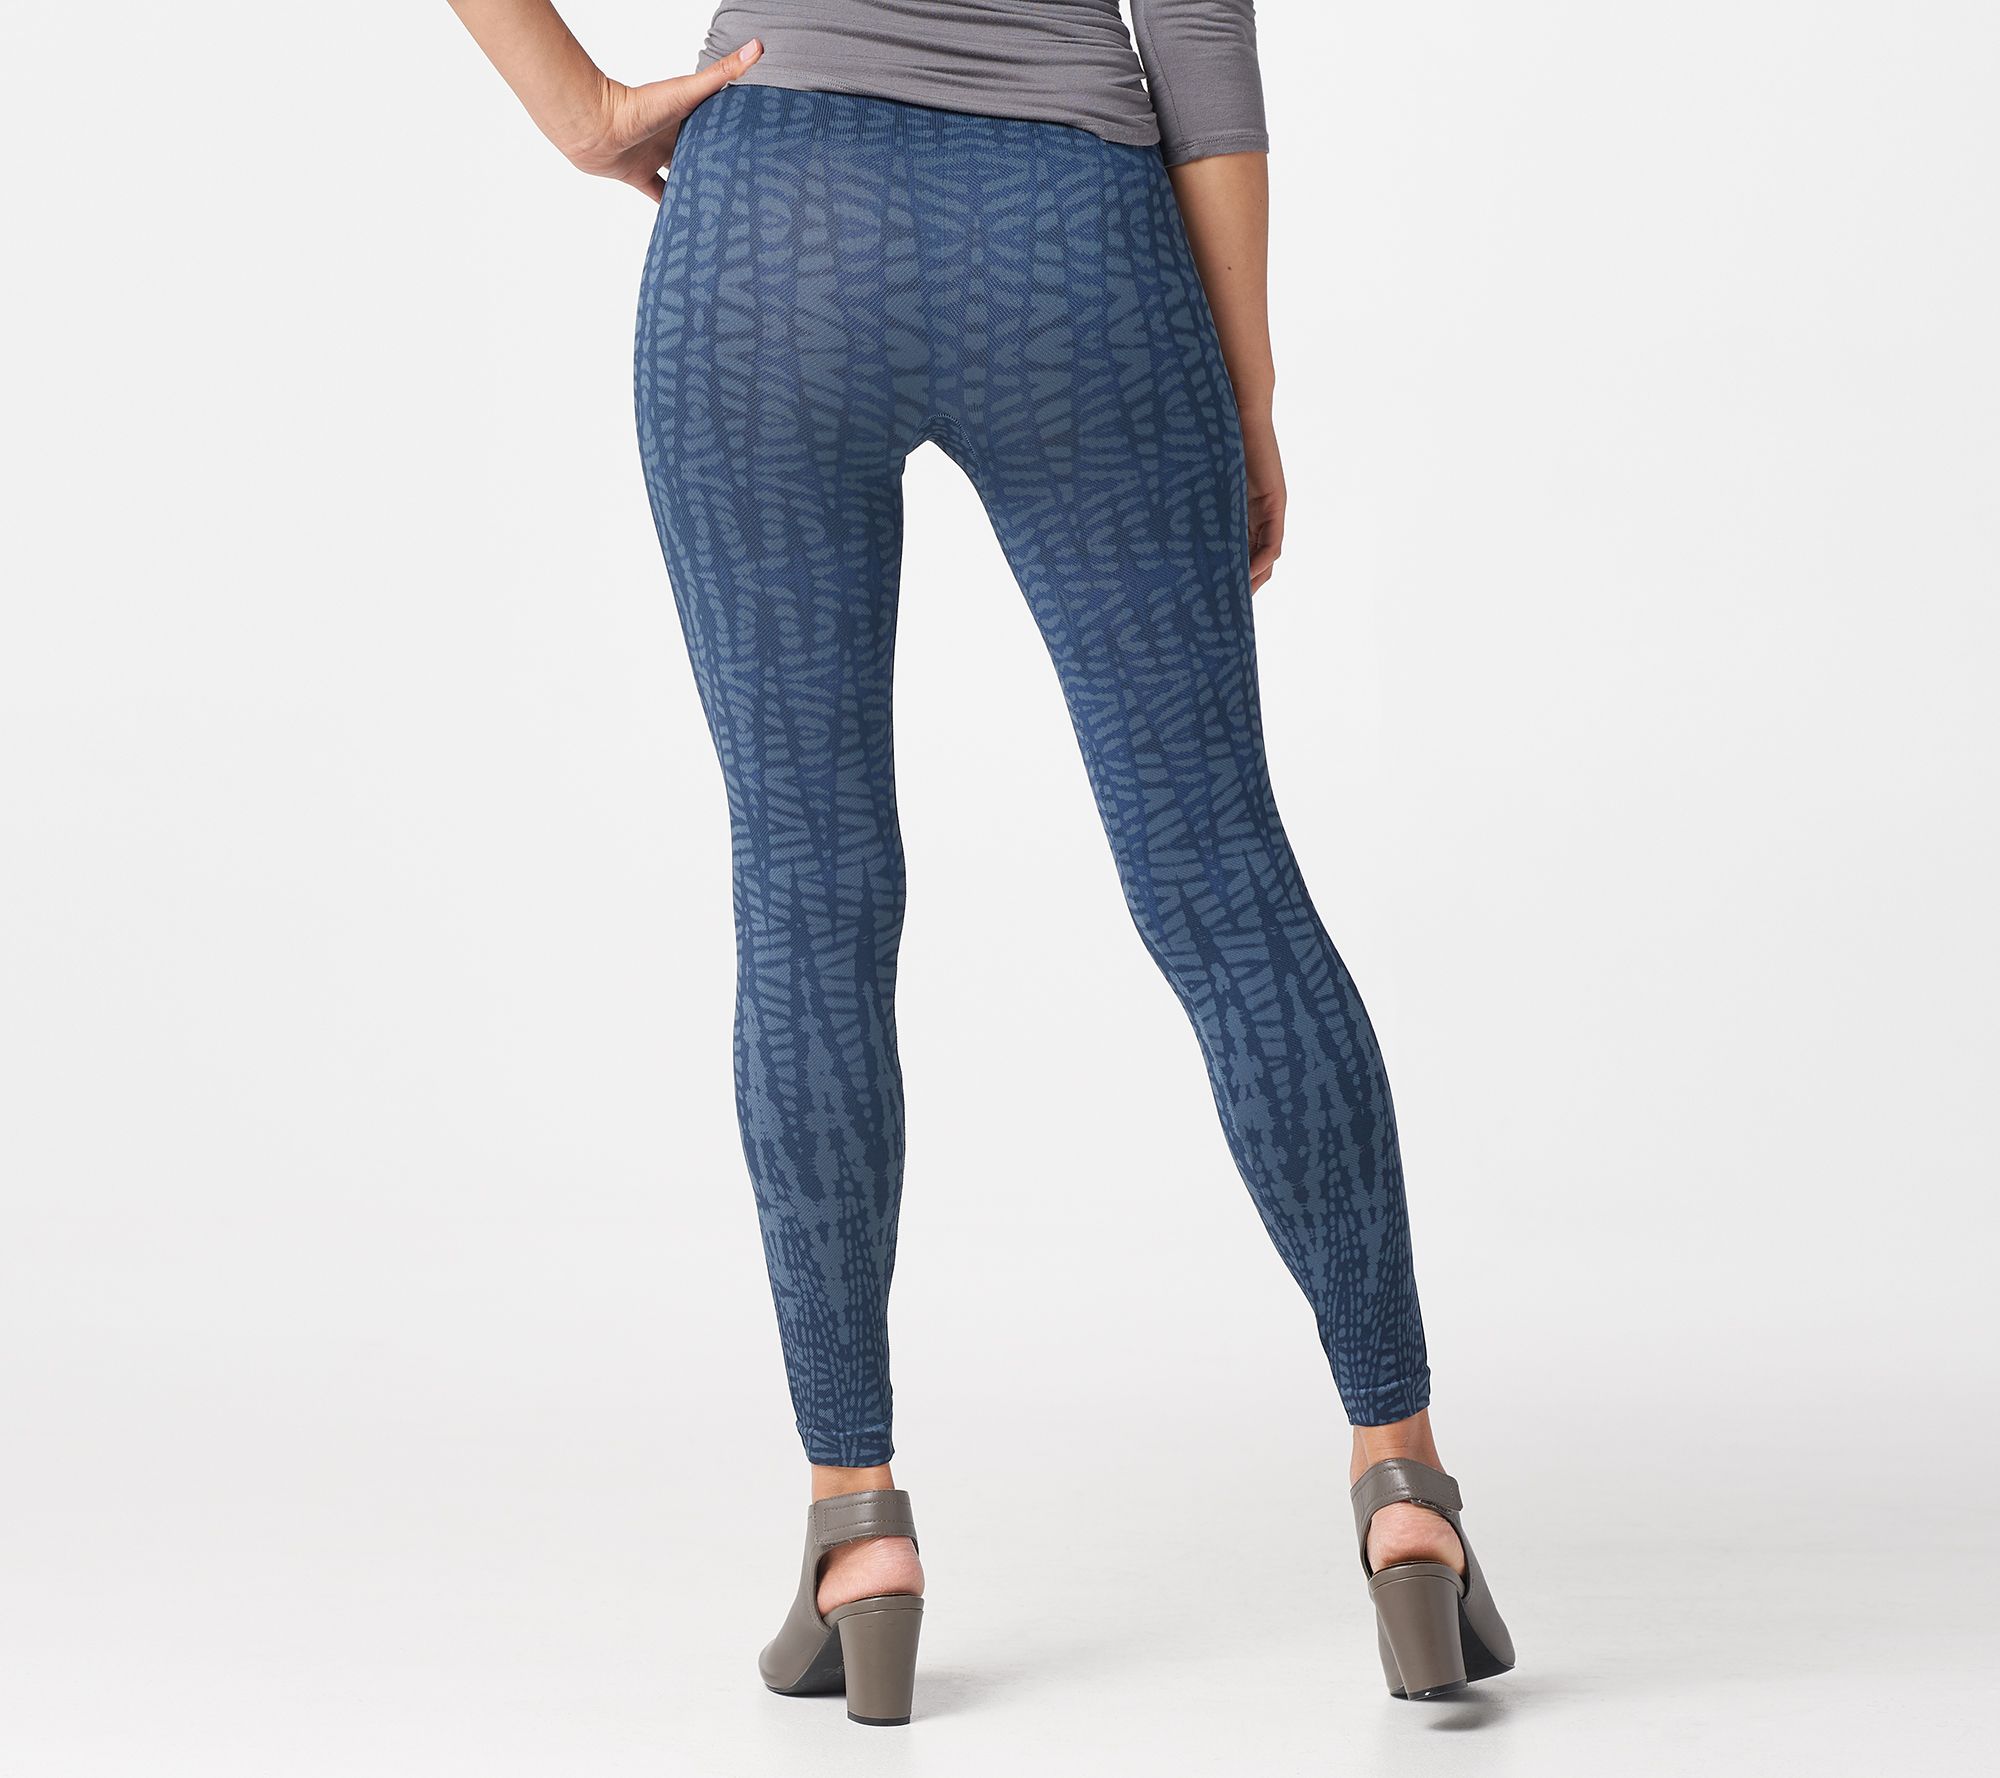 Spanx Look at Me Now Seamless Leggings - QVC.com